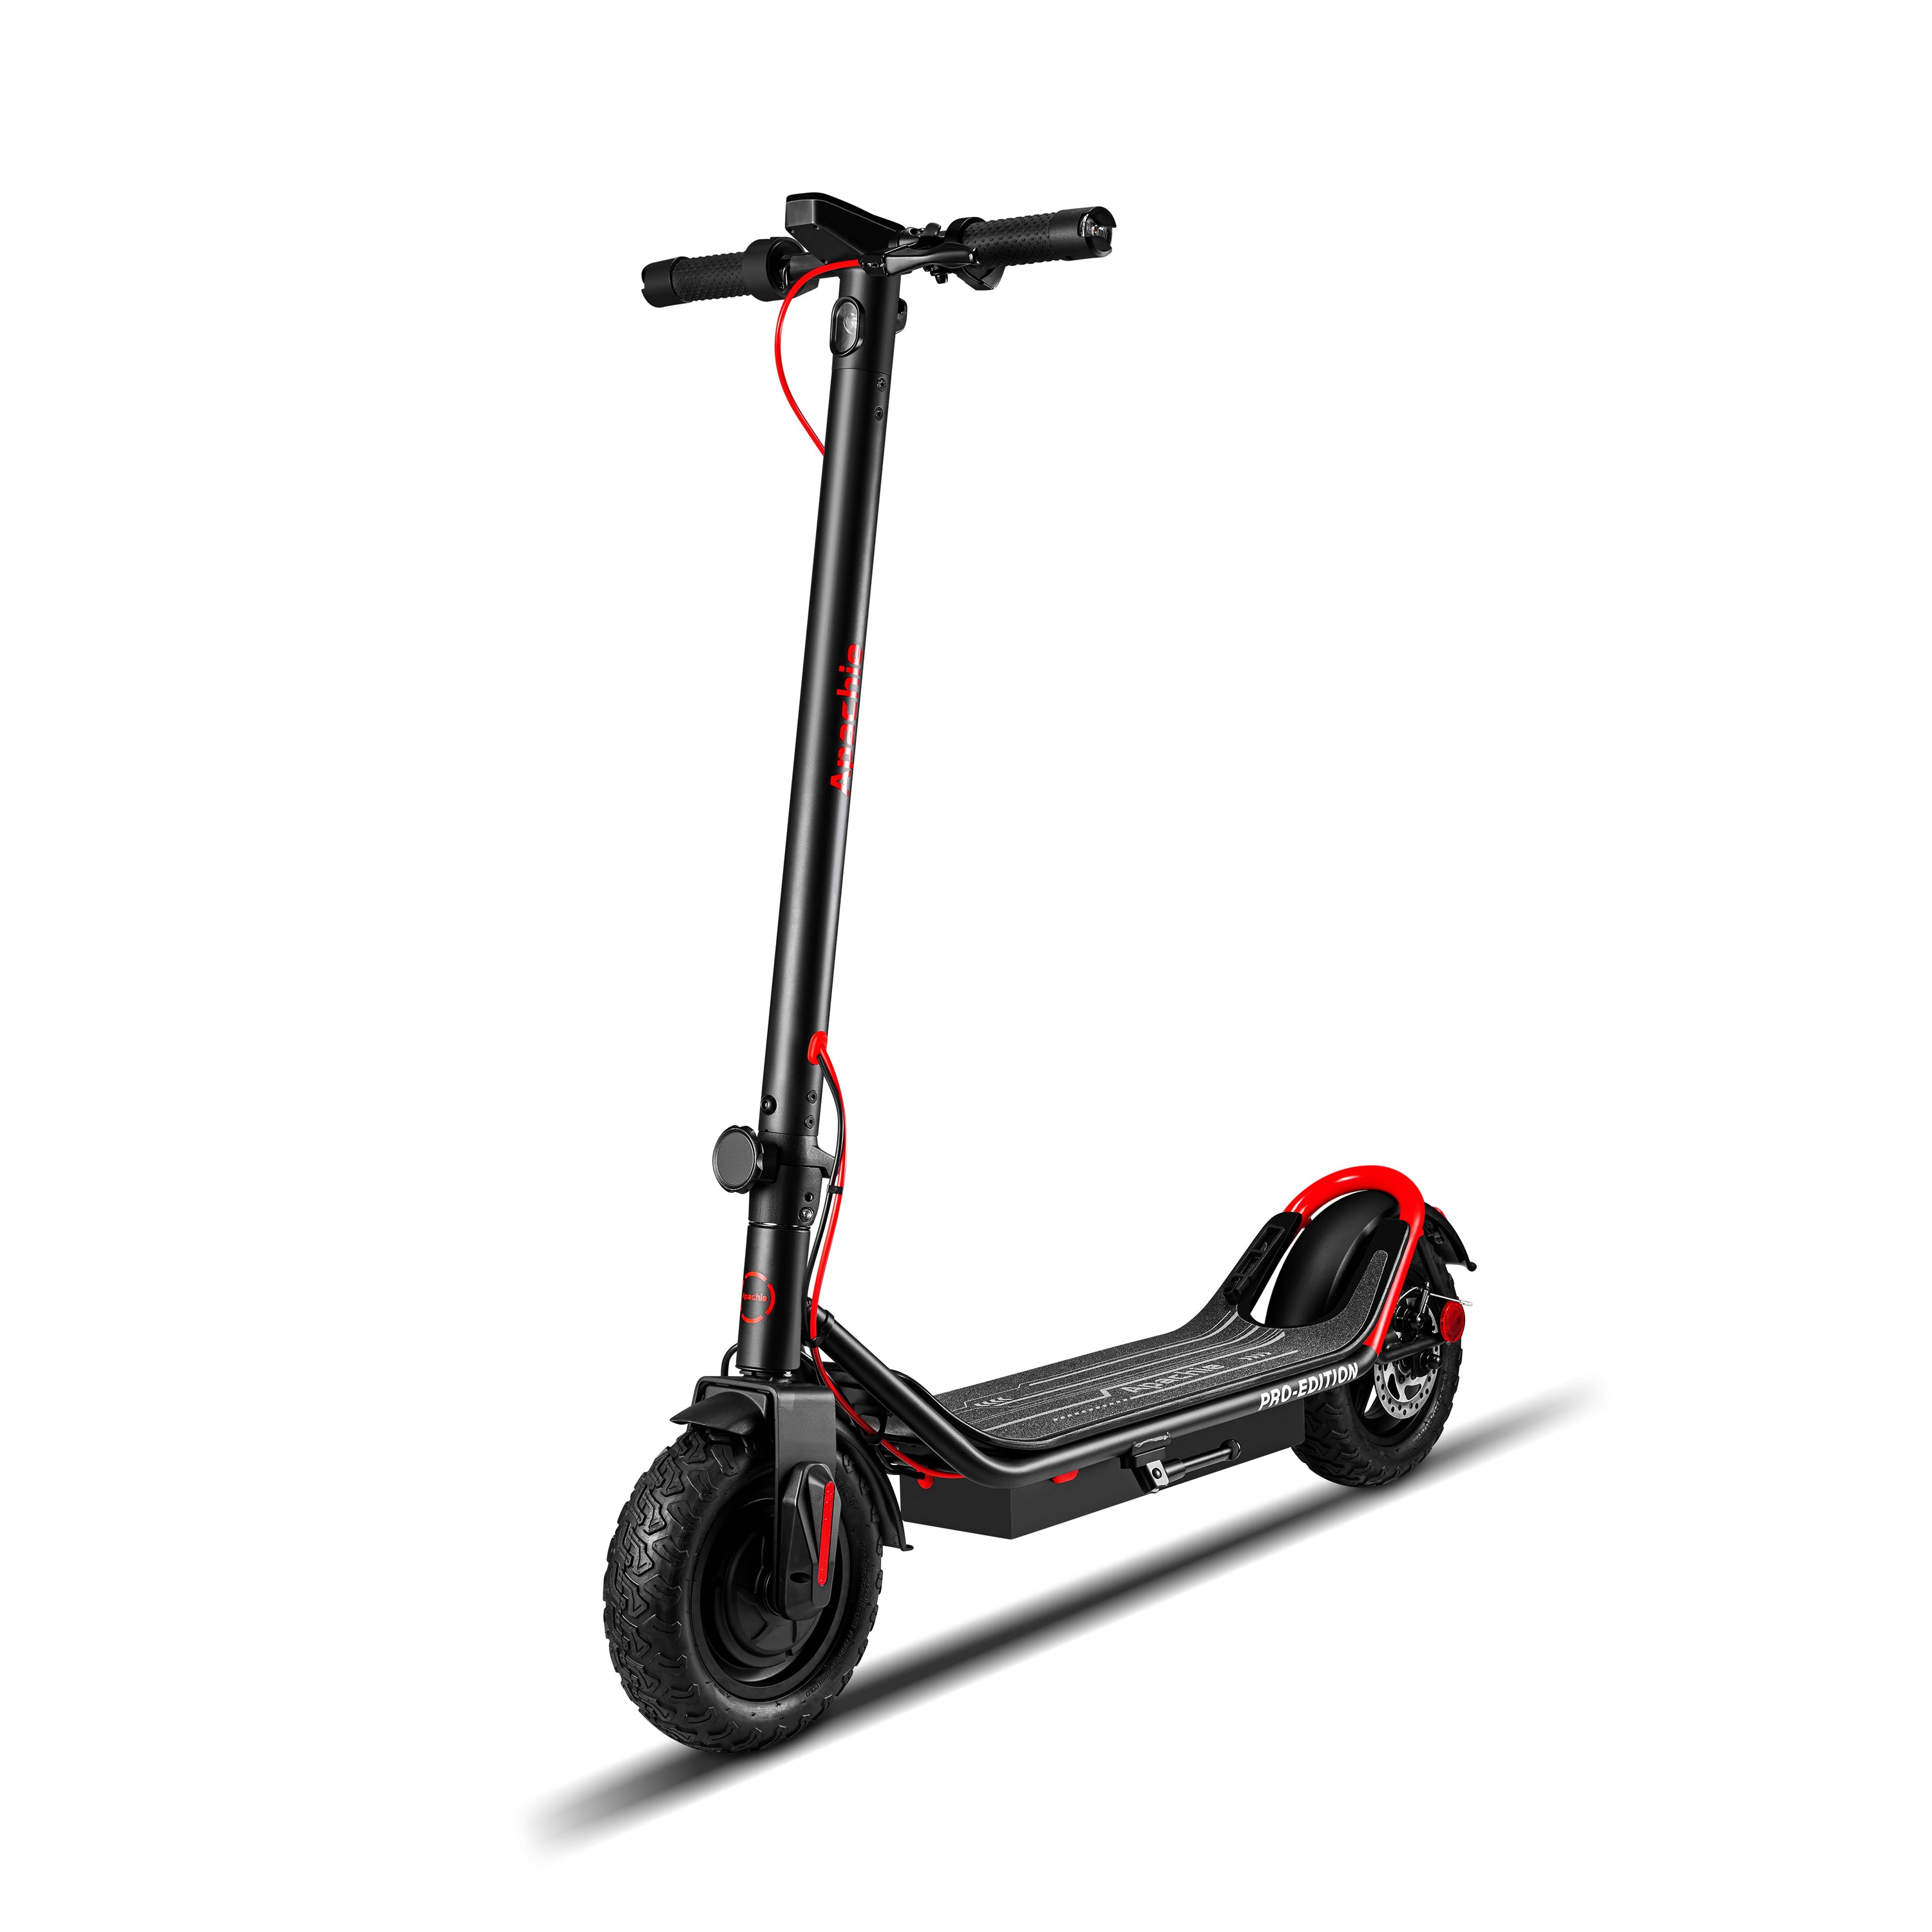 Apachie Pro Edition 500W Red Electric Scooter